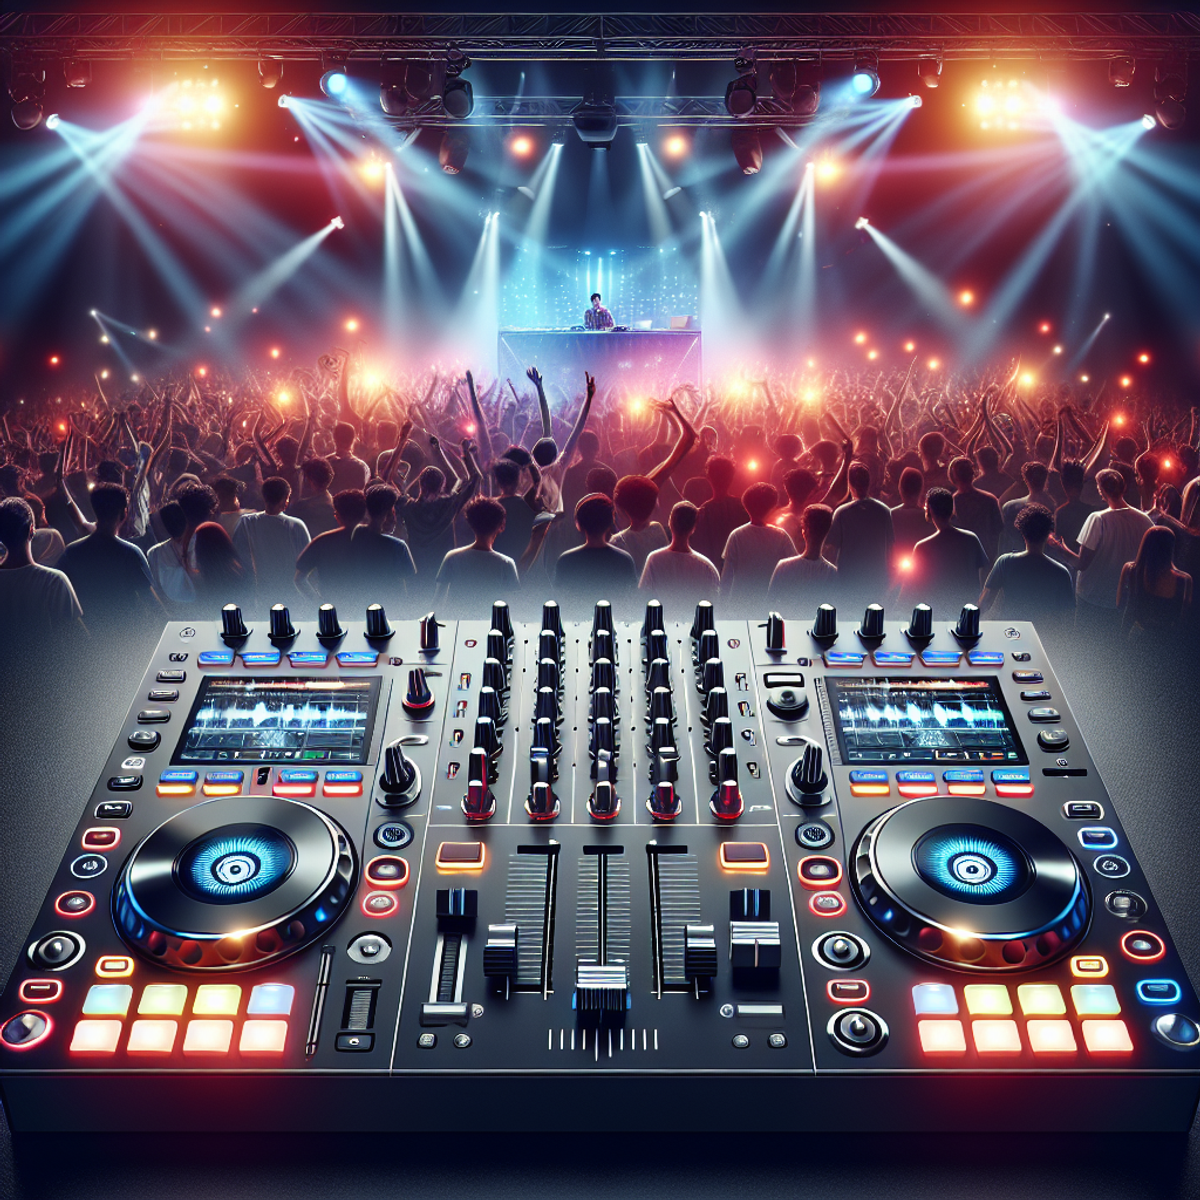 A DJ performing at a concert with a crowd and vibrant lights.